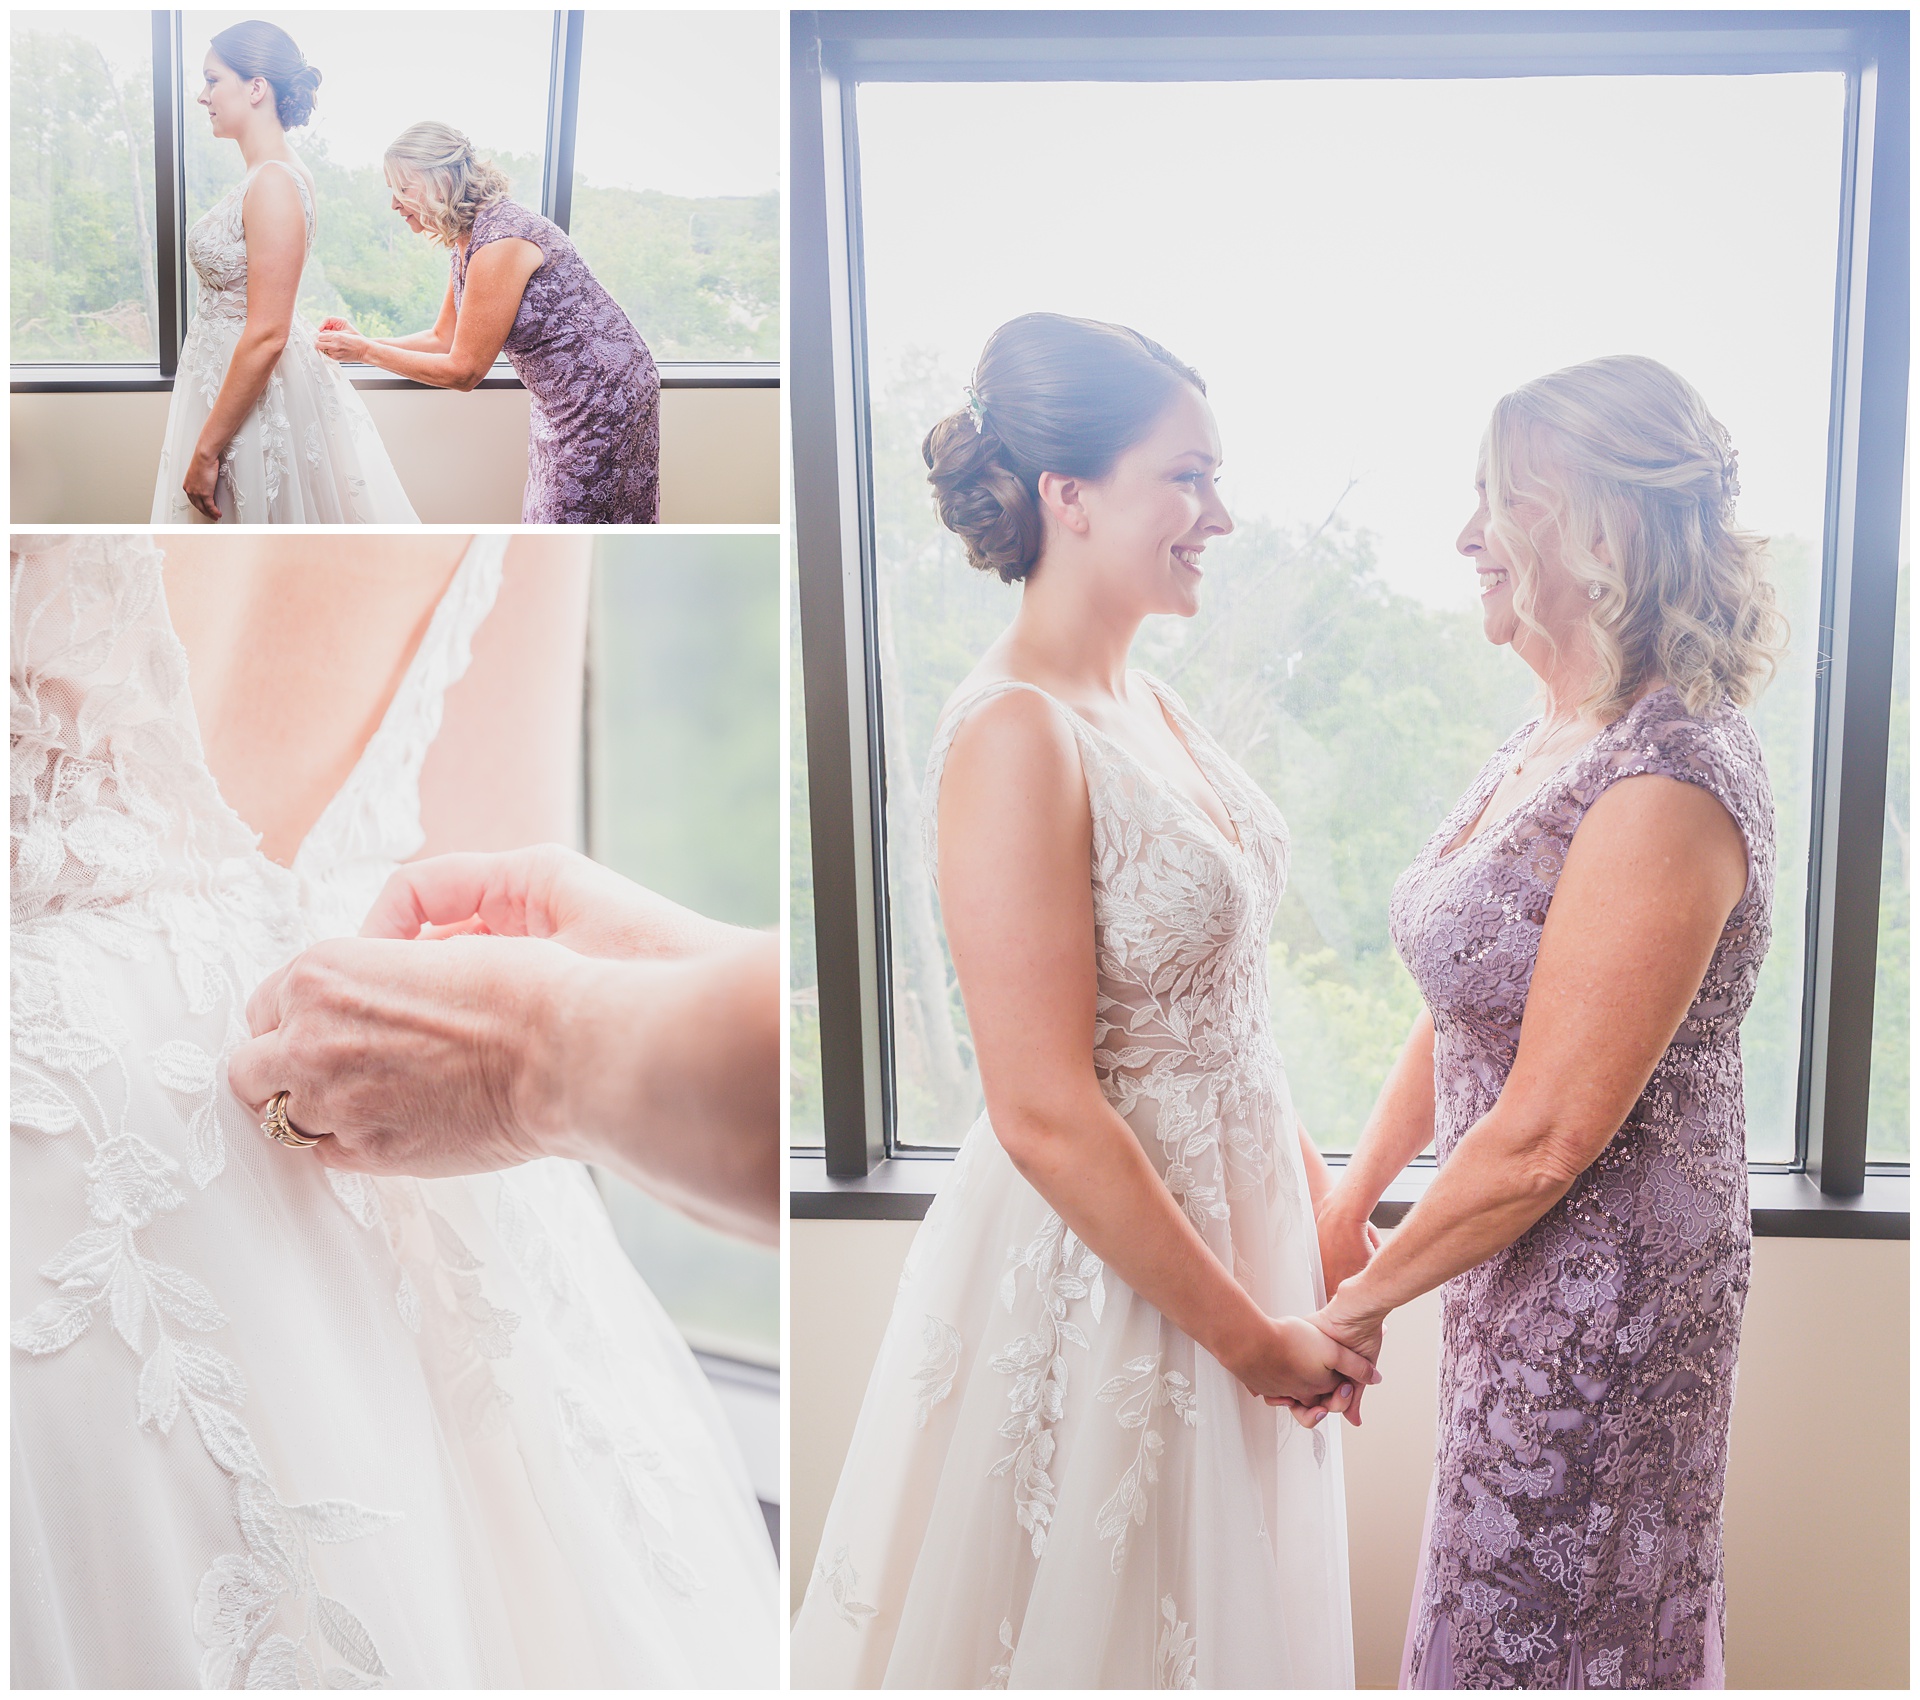 Wedding photography in Overland Park by Kansas City wedding photographers Wisdom-Watson Weddings.